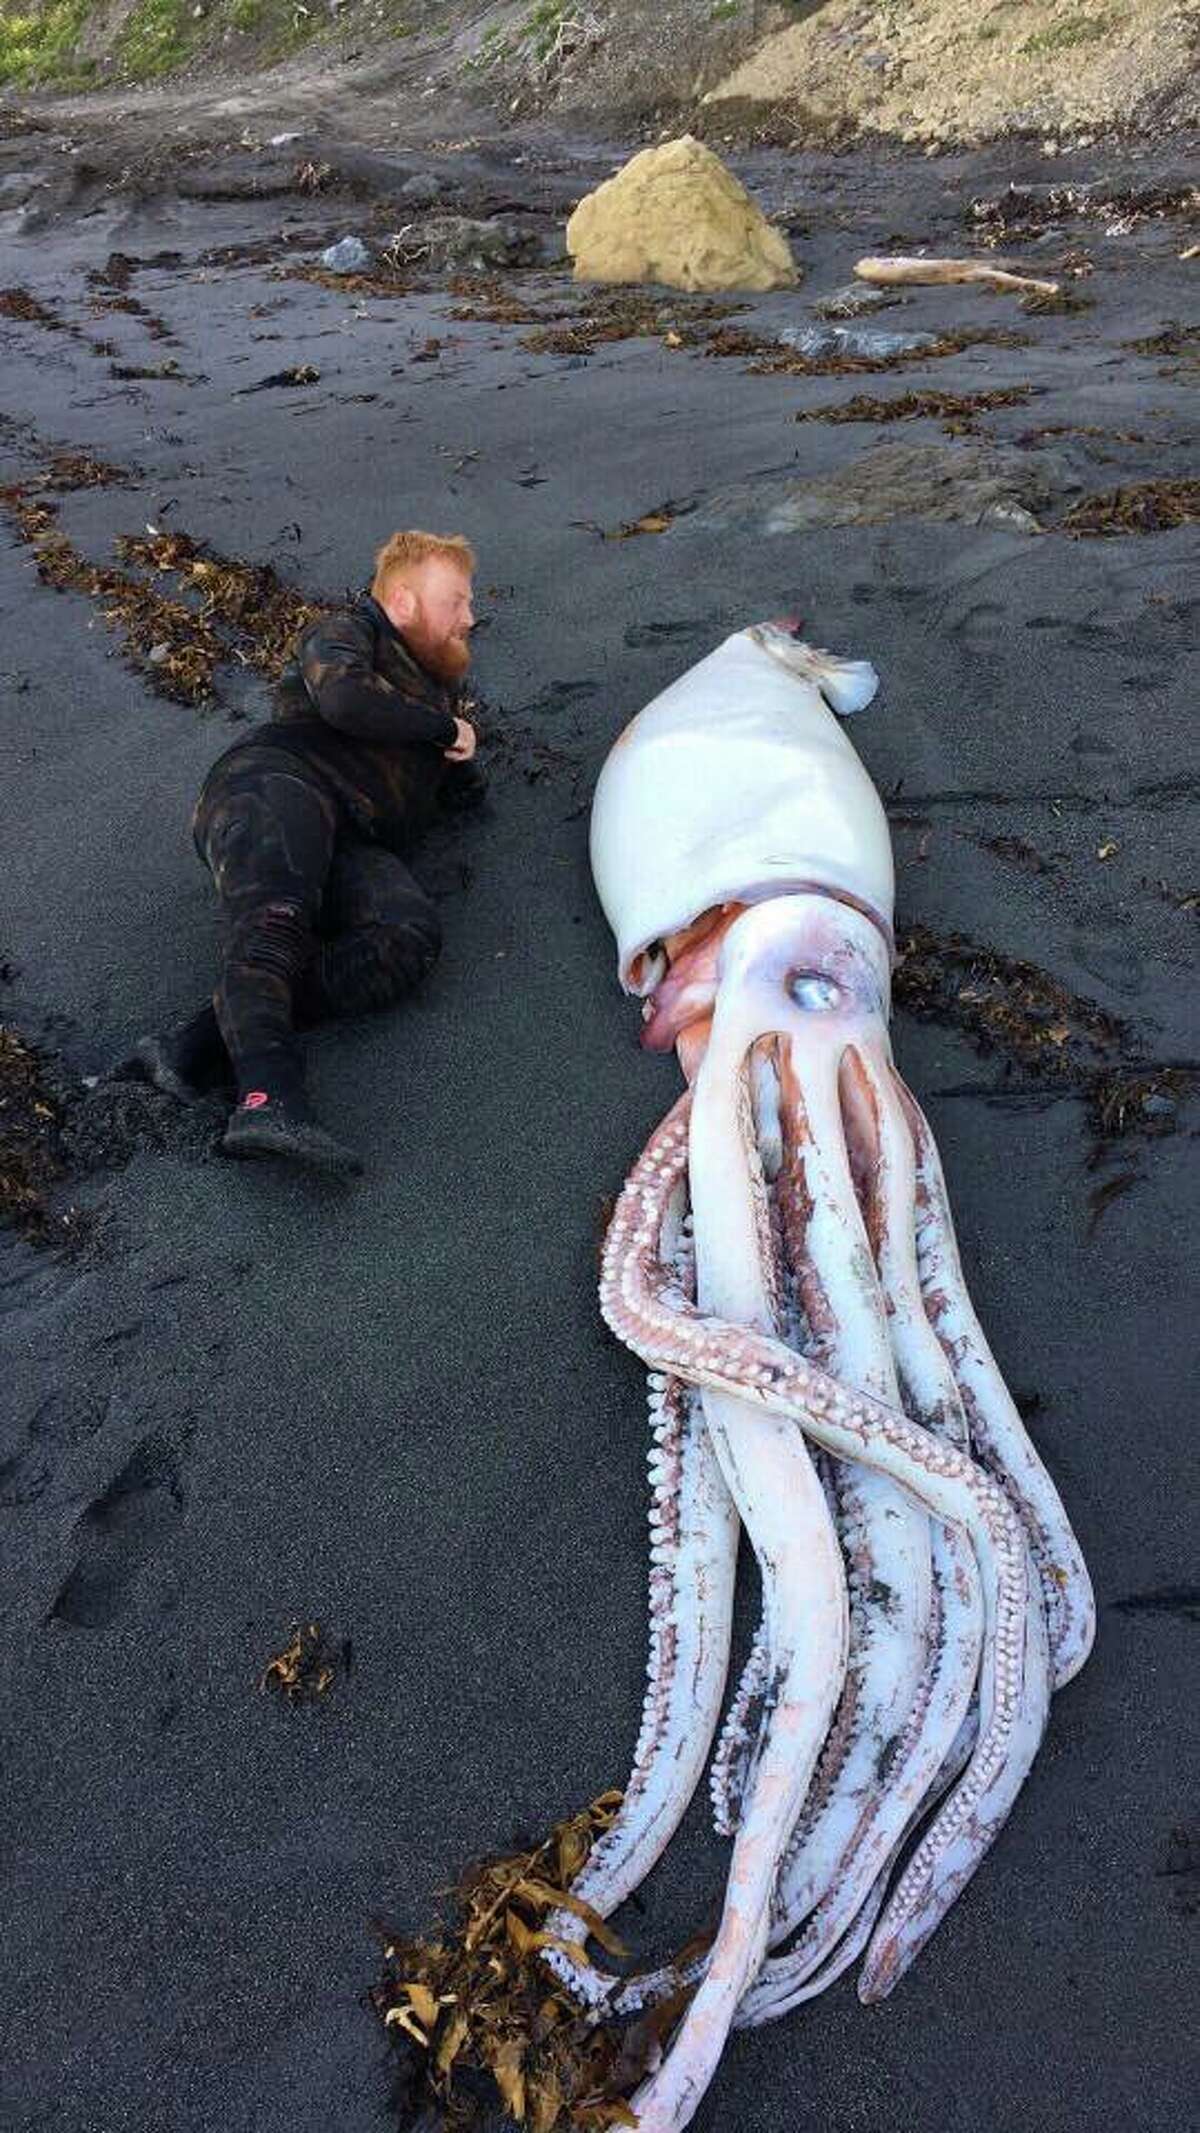 A squid measuring 13 feet in length was found washed up on the coast of New Zealand Sunday.